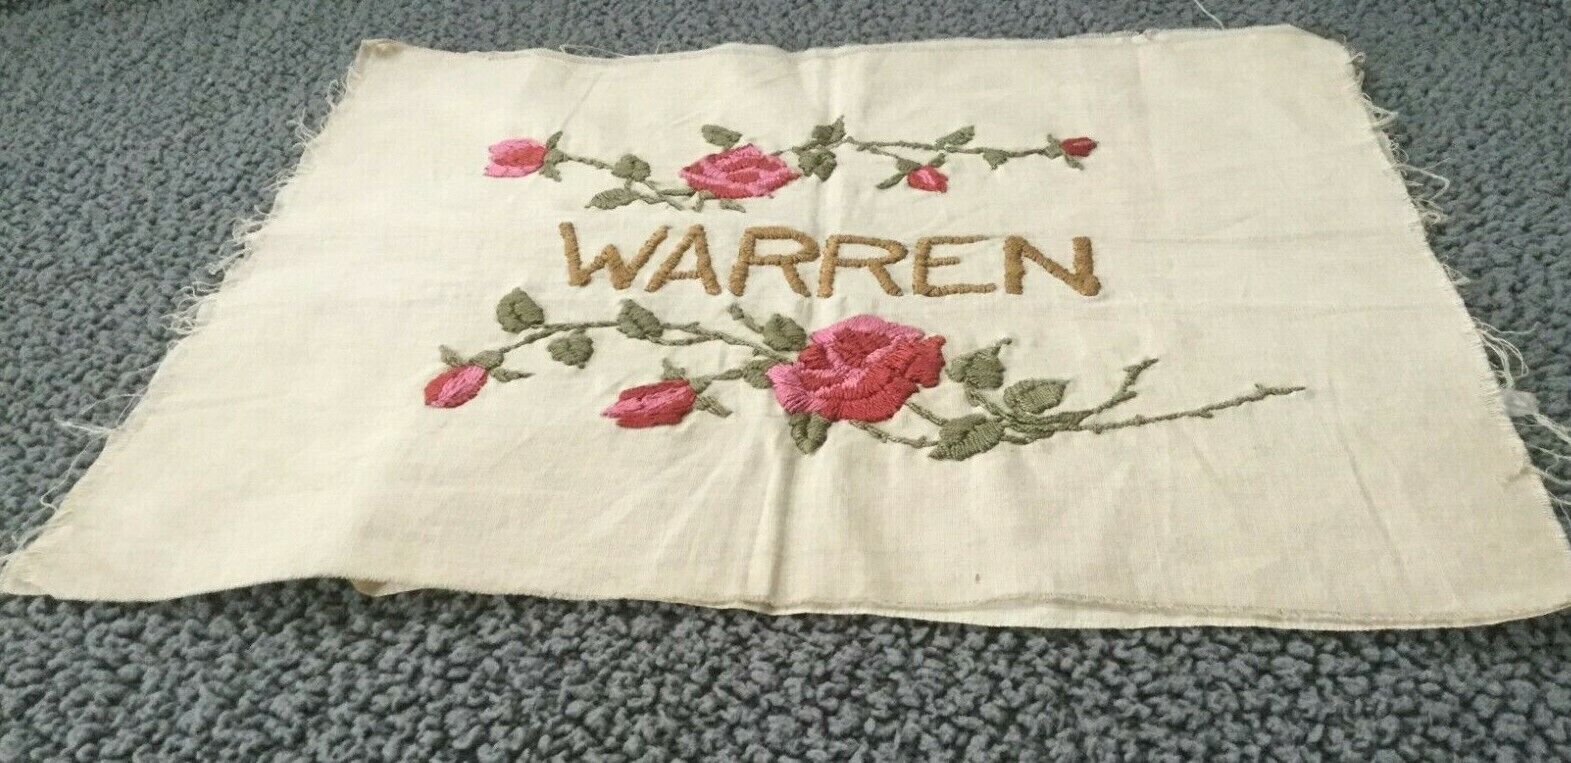 Vintage Hand Embroidered Pillow Cover / Warren, Ohio / Roses & Stems 15 1/2 x19 